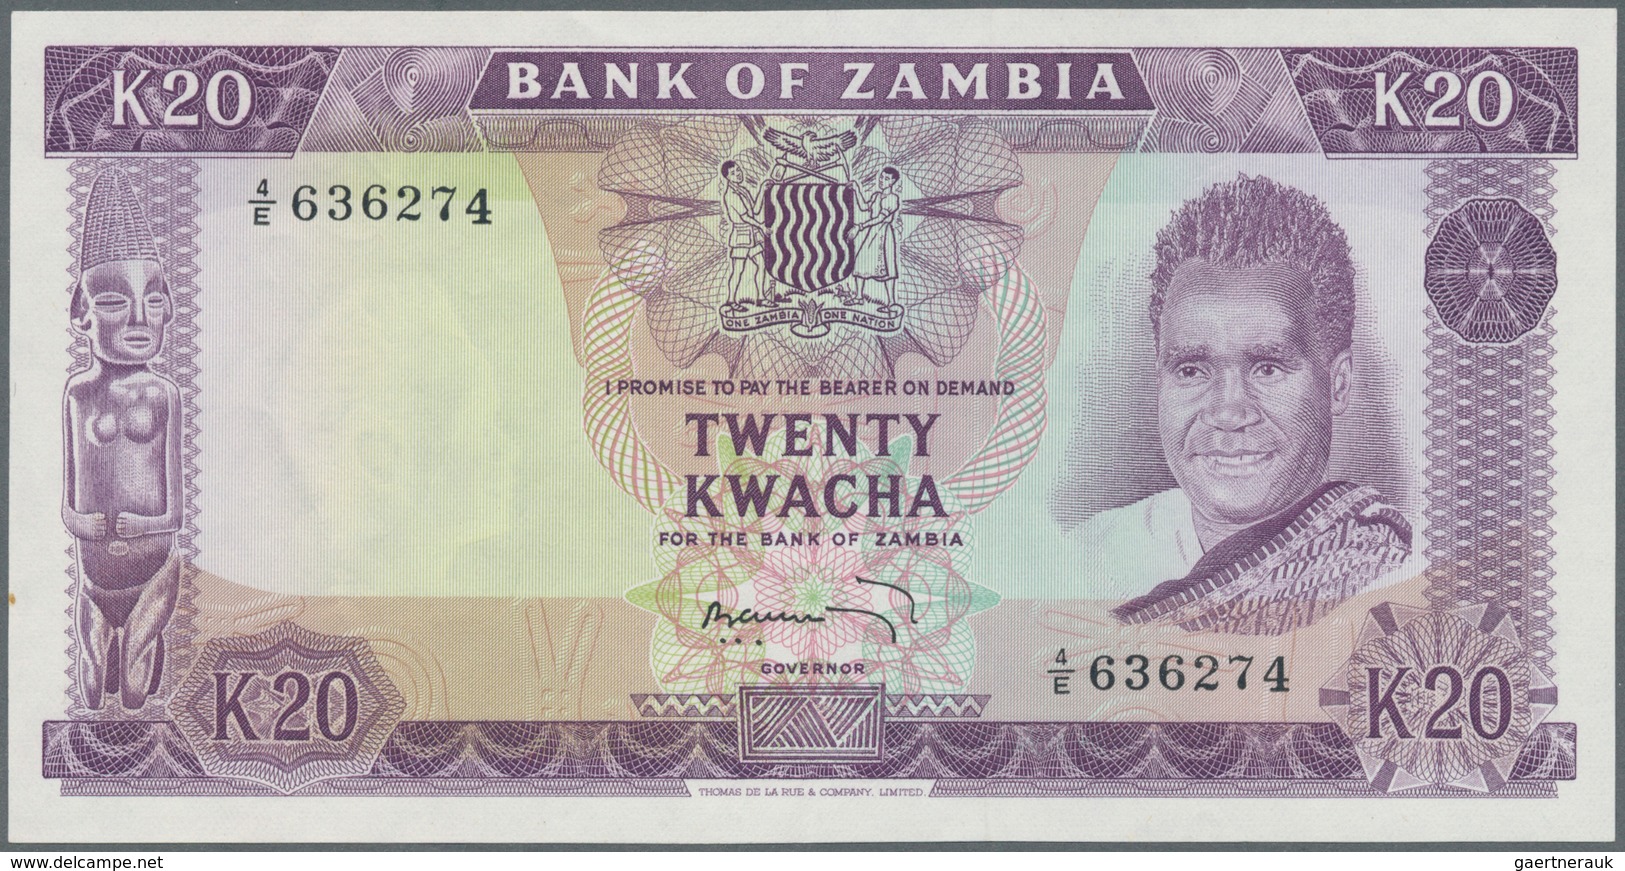 Africa / Afrika: Collectors Book With 134 Banknotes And 8 Promotional Notes From Zambia, Zimbabwe An - Other - Africa